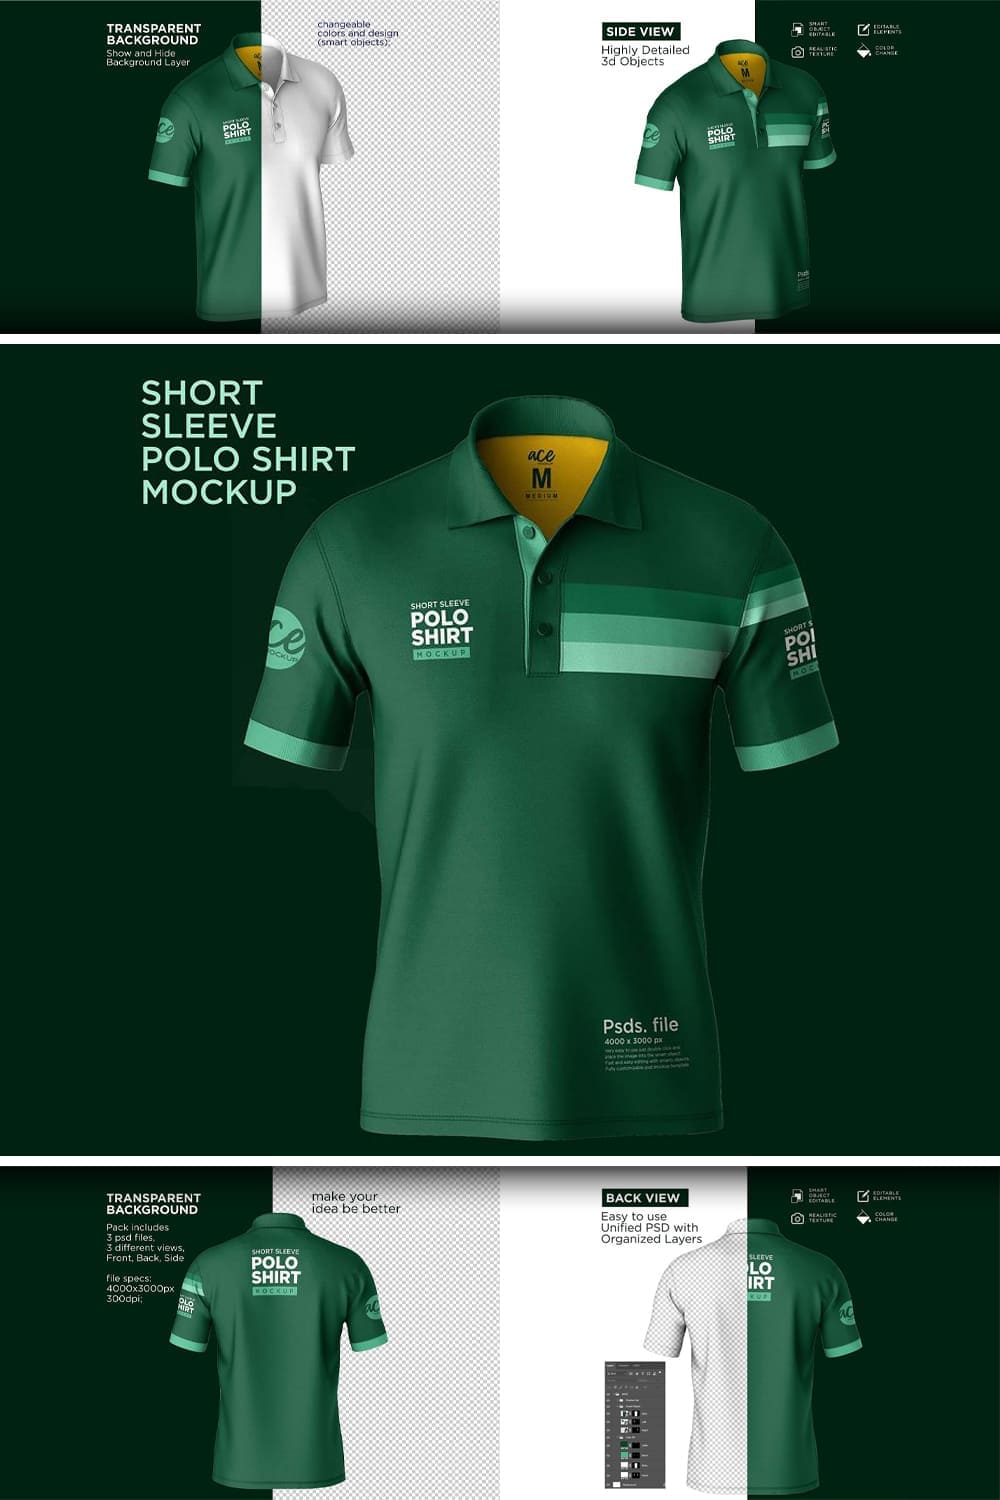 Short sleeve polo shirt mockup on the green background.